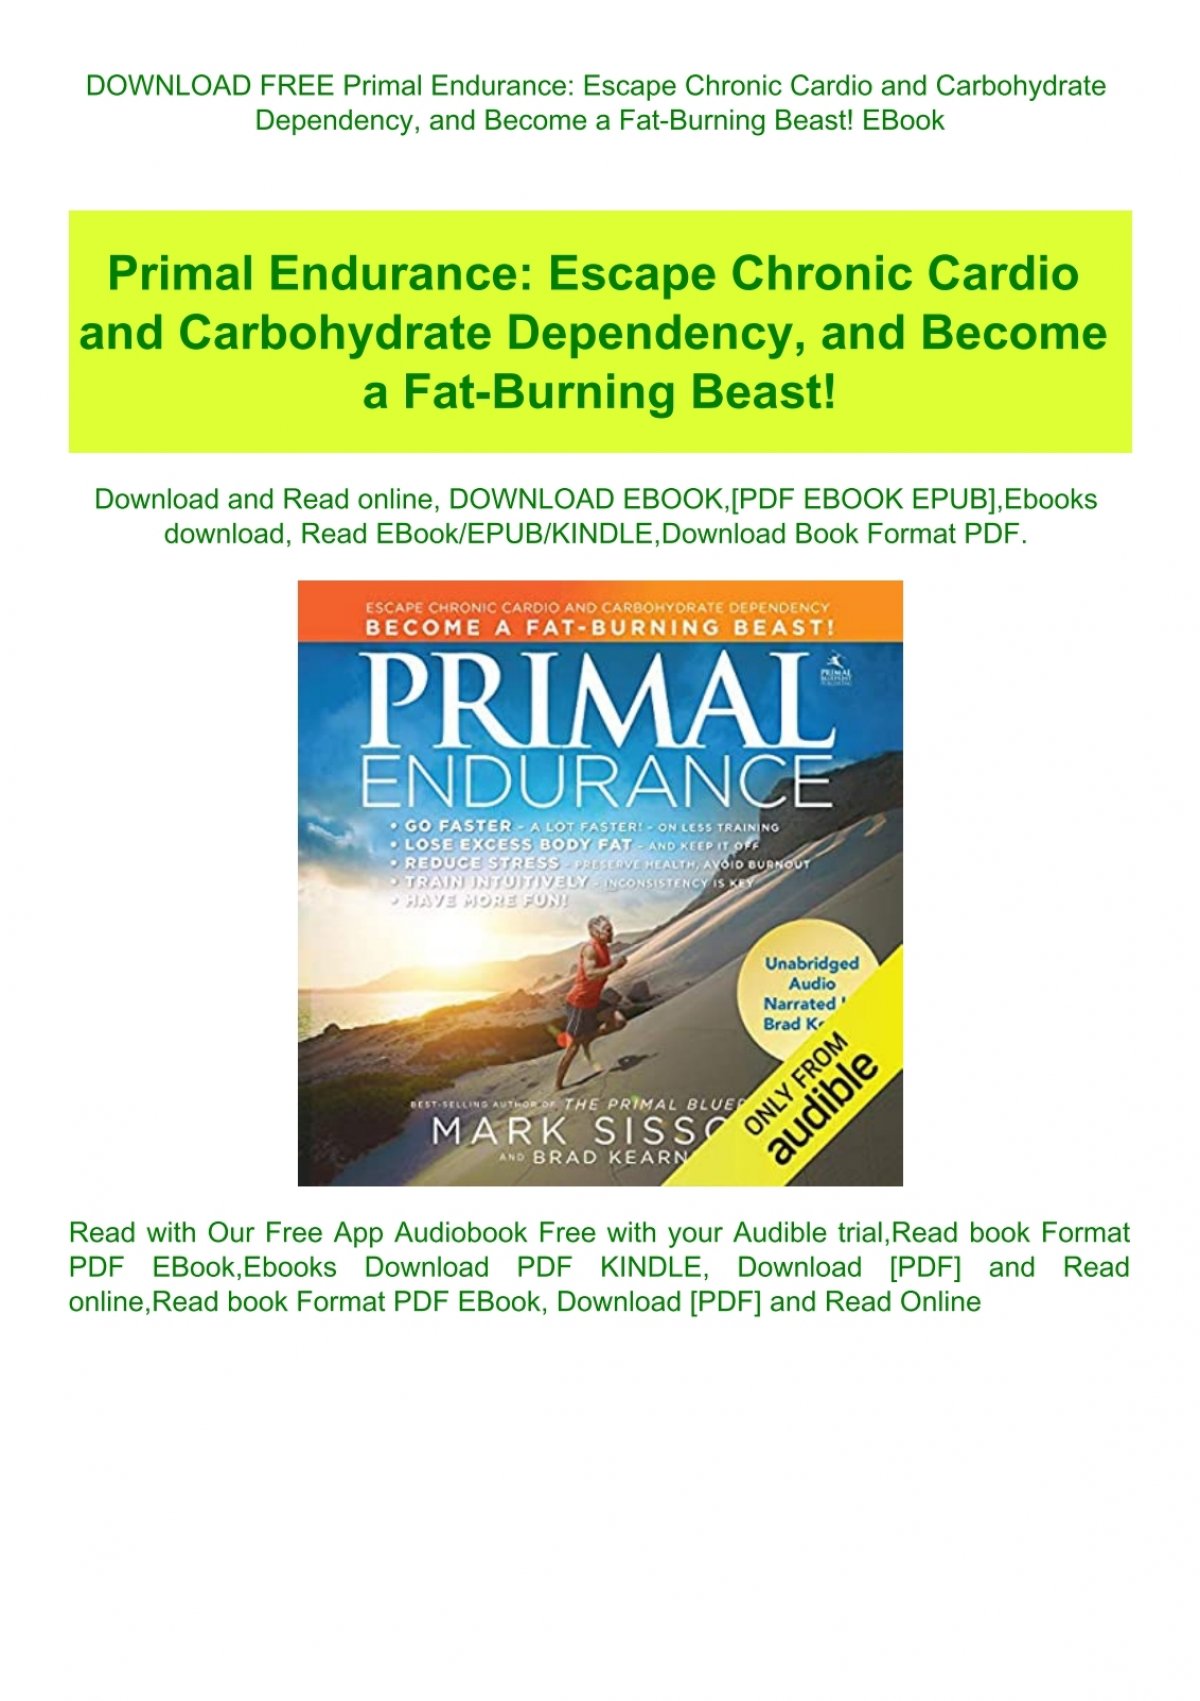 DOWNLOAD FREE Primal Endurance Chronic Cardio and Carbohydrate Dependency and Become a Fat-Burning Beast! EBook